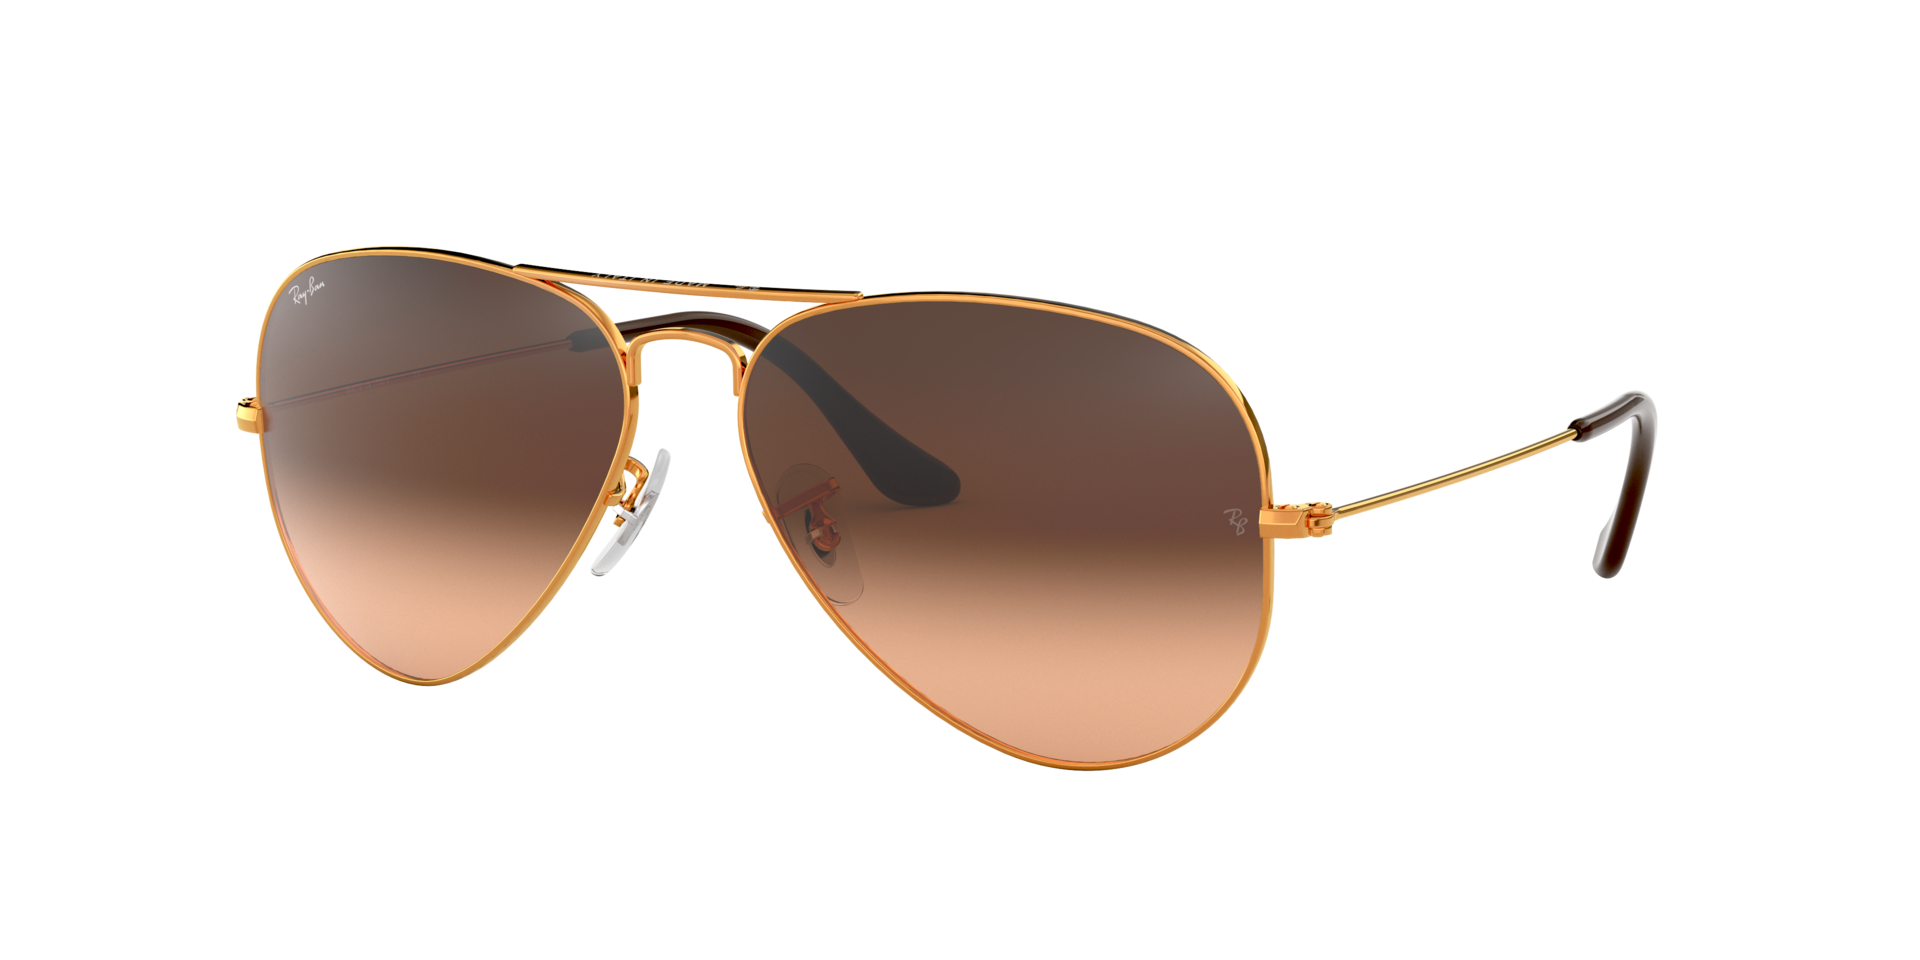 Ray-Ban Aviator Large Metal Sonnenbrille RB3025 9001/A5 58